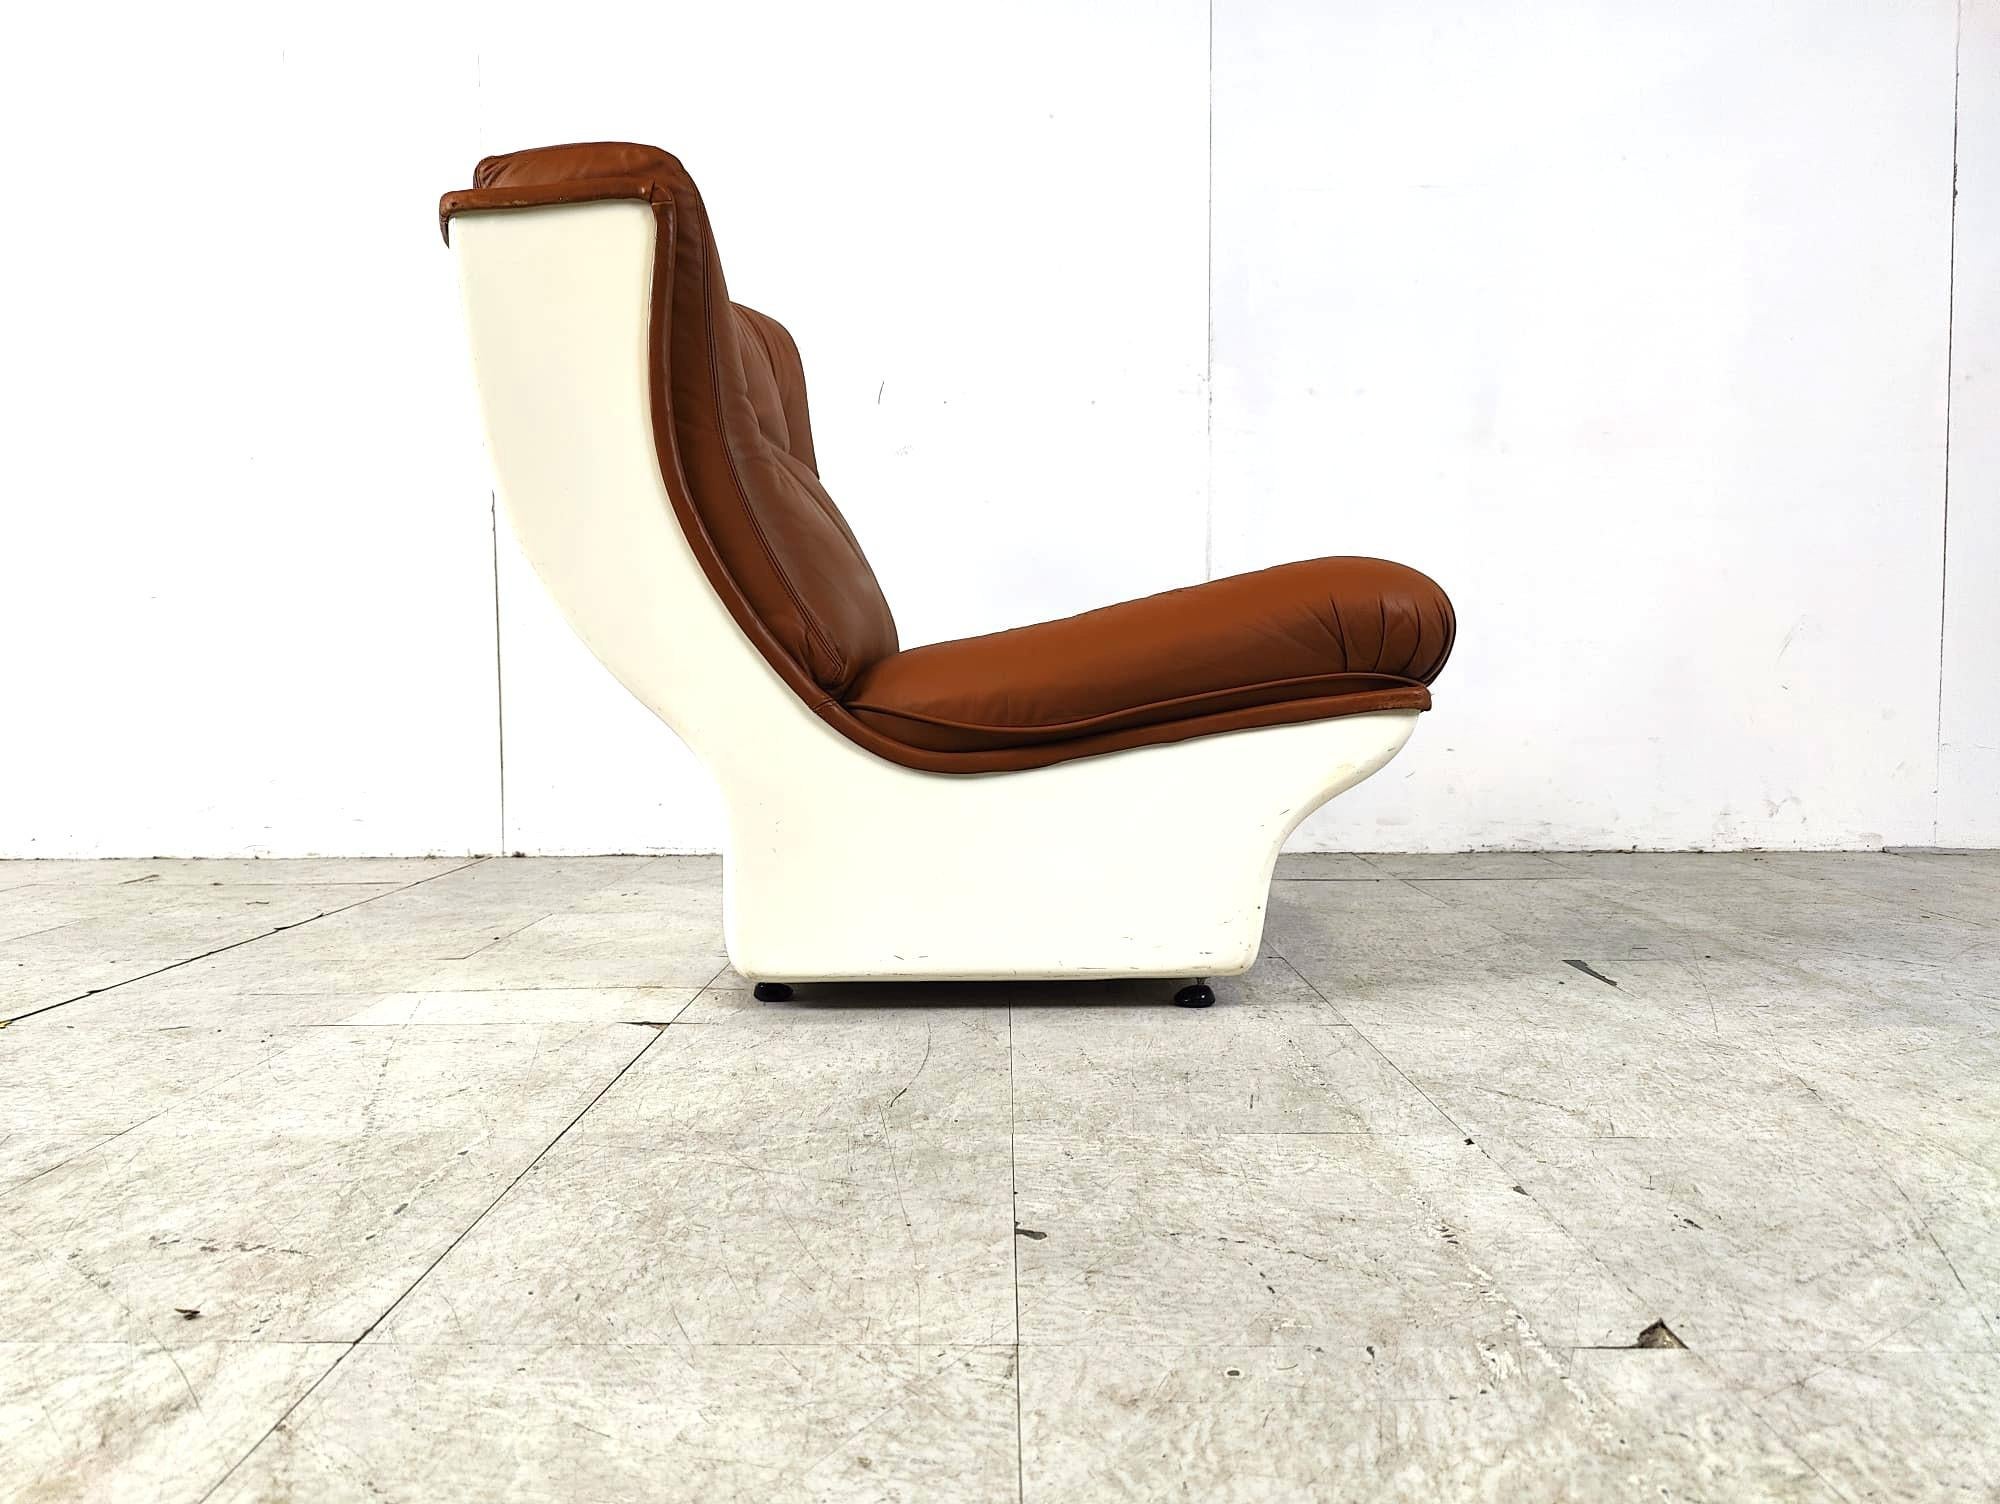 Space age leather lounge chair by Airborne international, 1970s For Sale 1